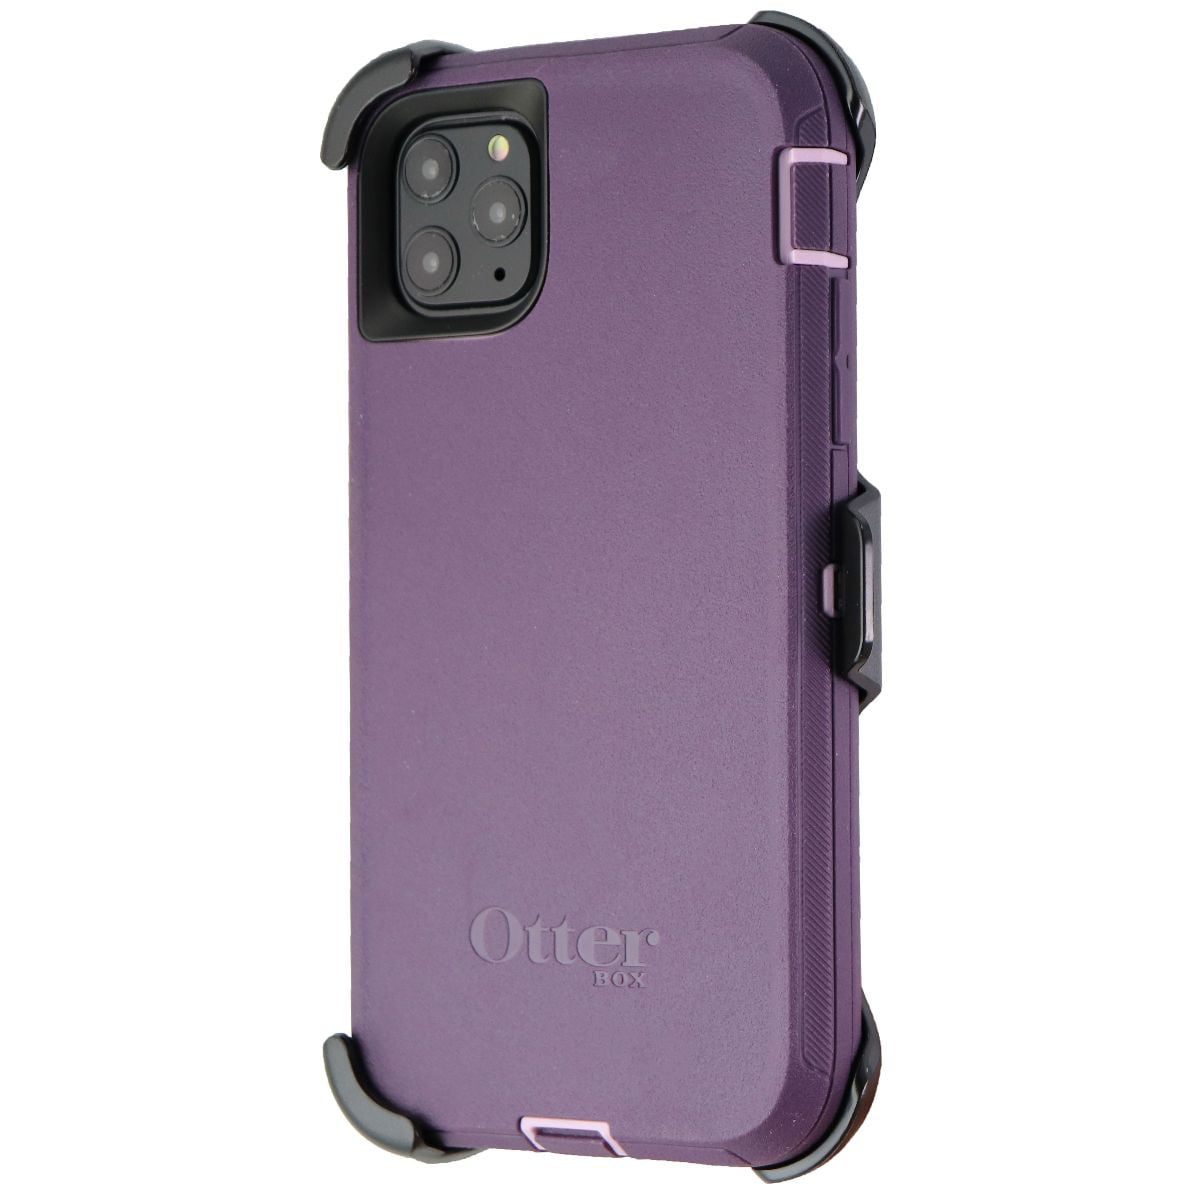 OtterBox Defender Series Case for Apple iPhone 11 Pro Max (6.5